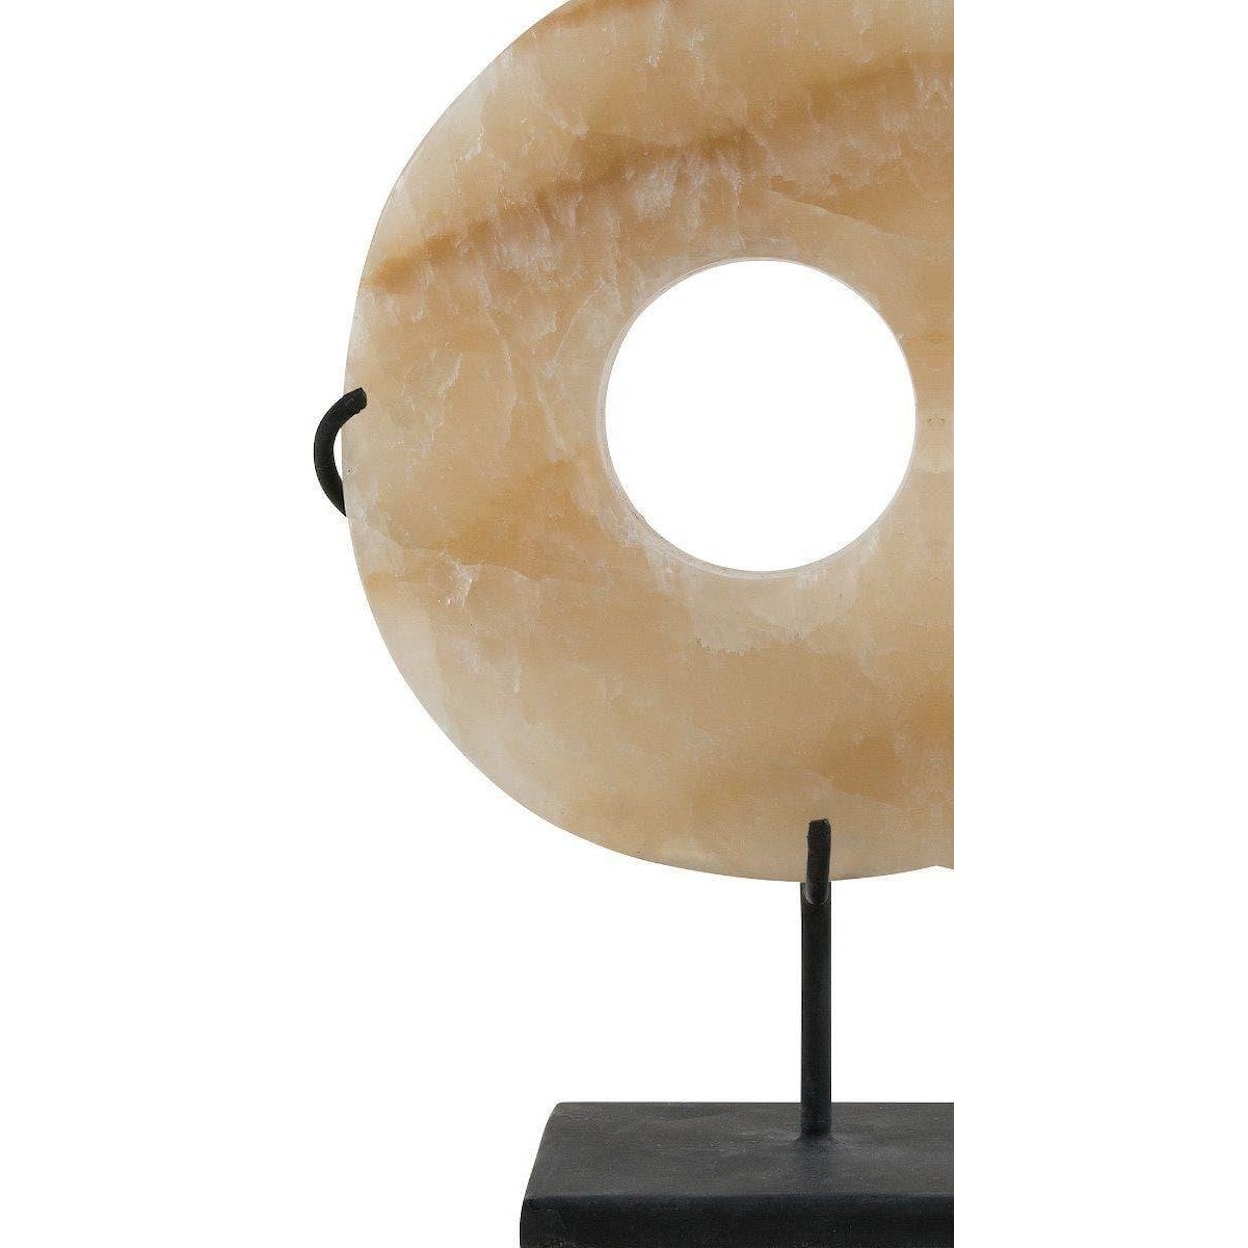 Ibolili Sculptures Small Onyx Ring